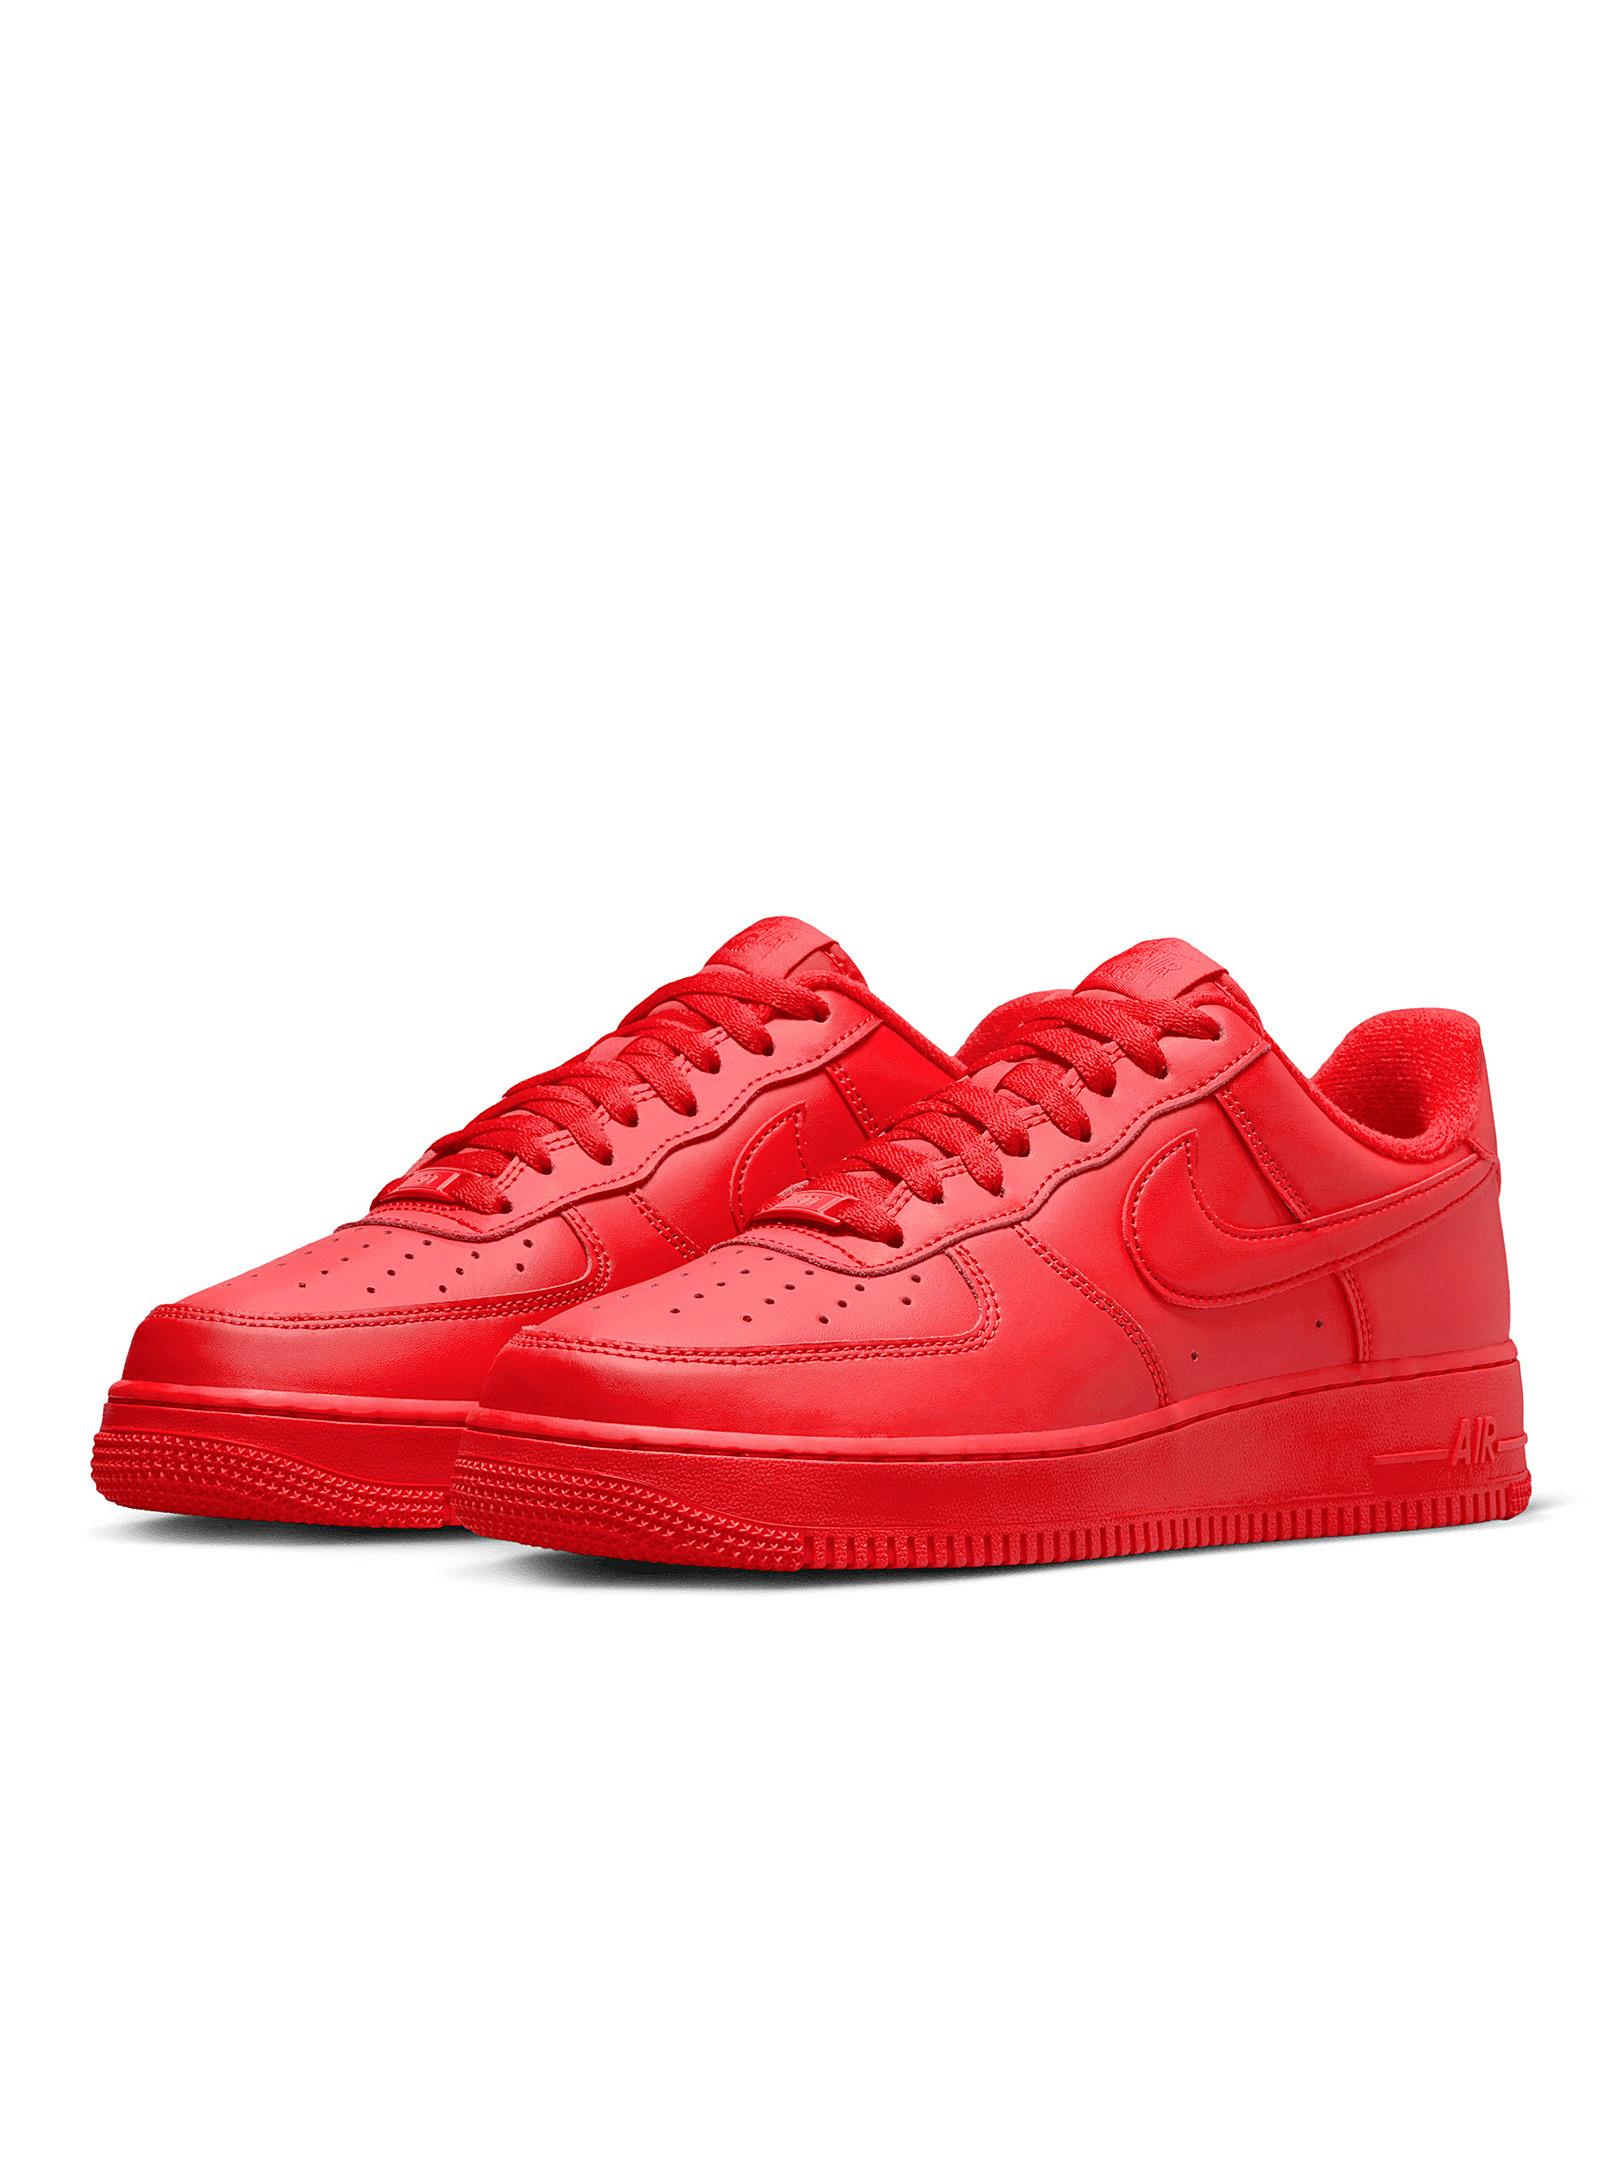 Nike Picante Red Air Force 1 '07 Sneakers Men for Men | Lyst